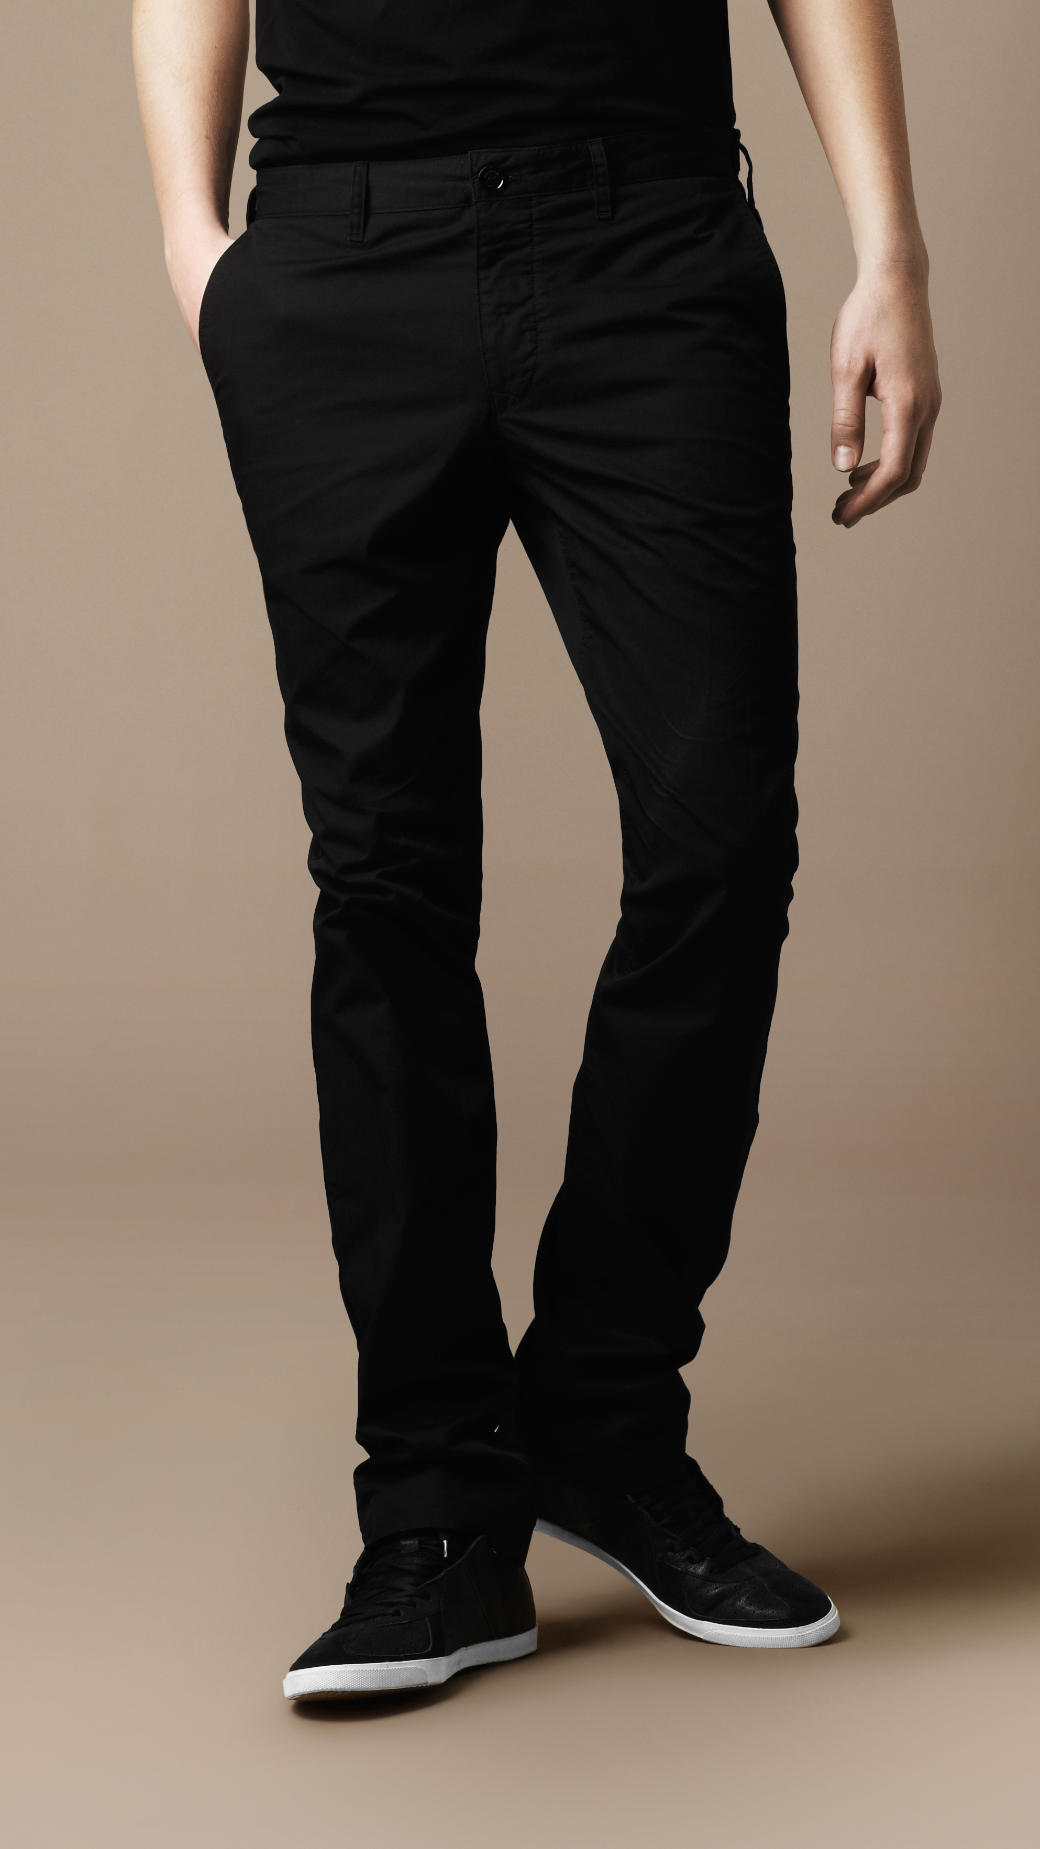 Lyst - Burberry Brit Slim Fit Cotton Chino Trousers in Black for Men